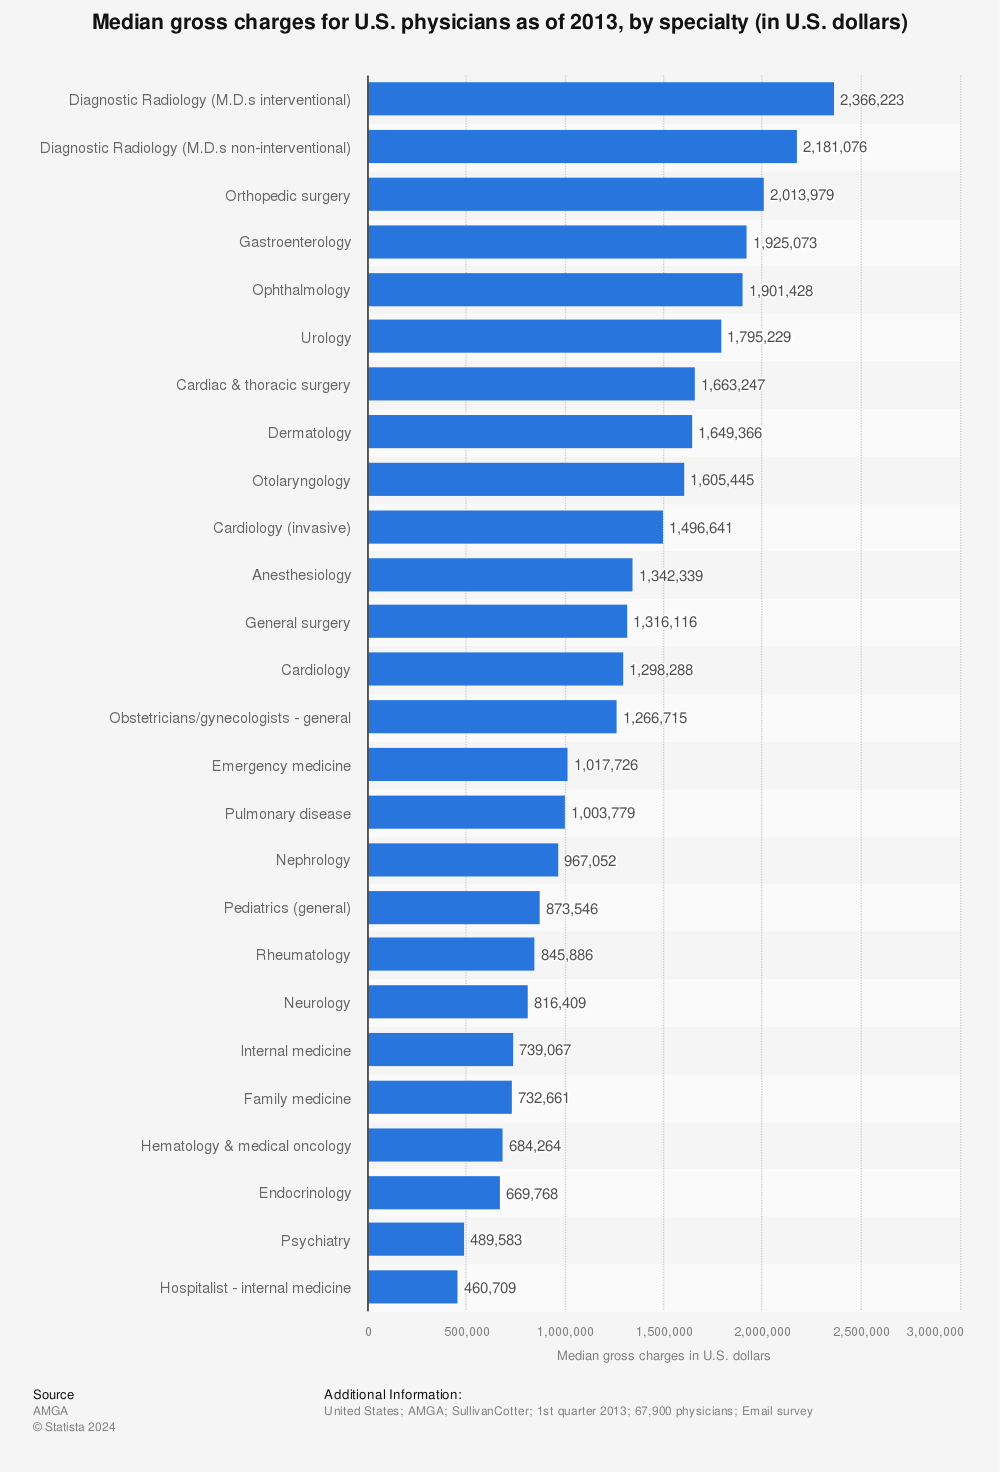 Statistic: Median gross charges for U.S. physicians as of 2013, by specialty (in U.S. dollars) | Statista